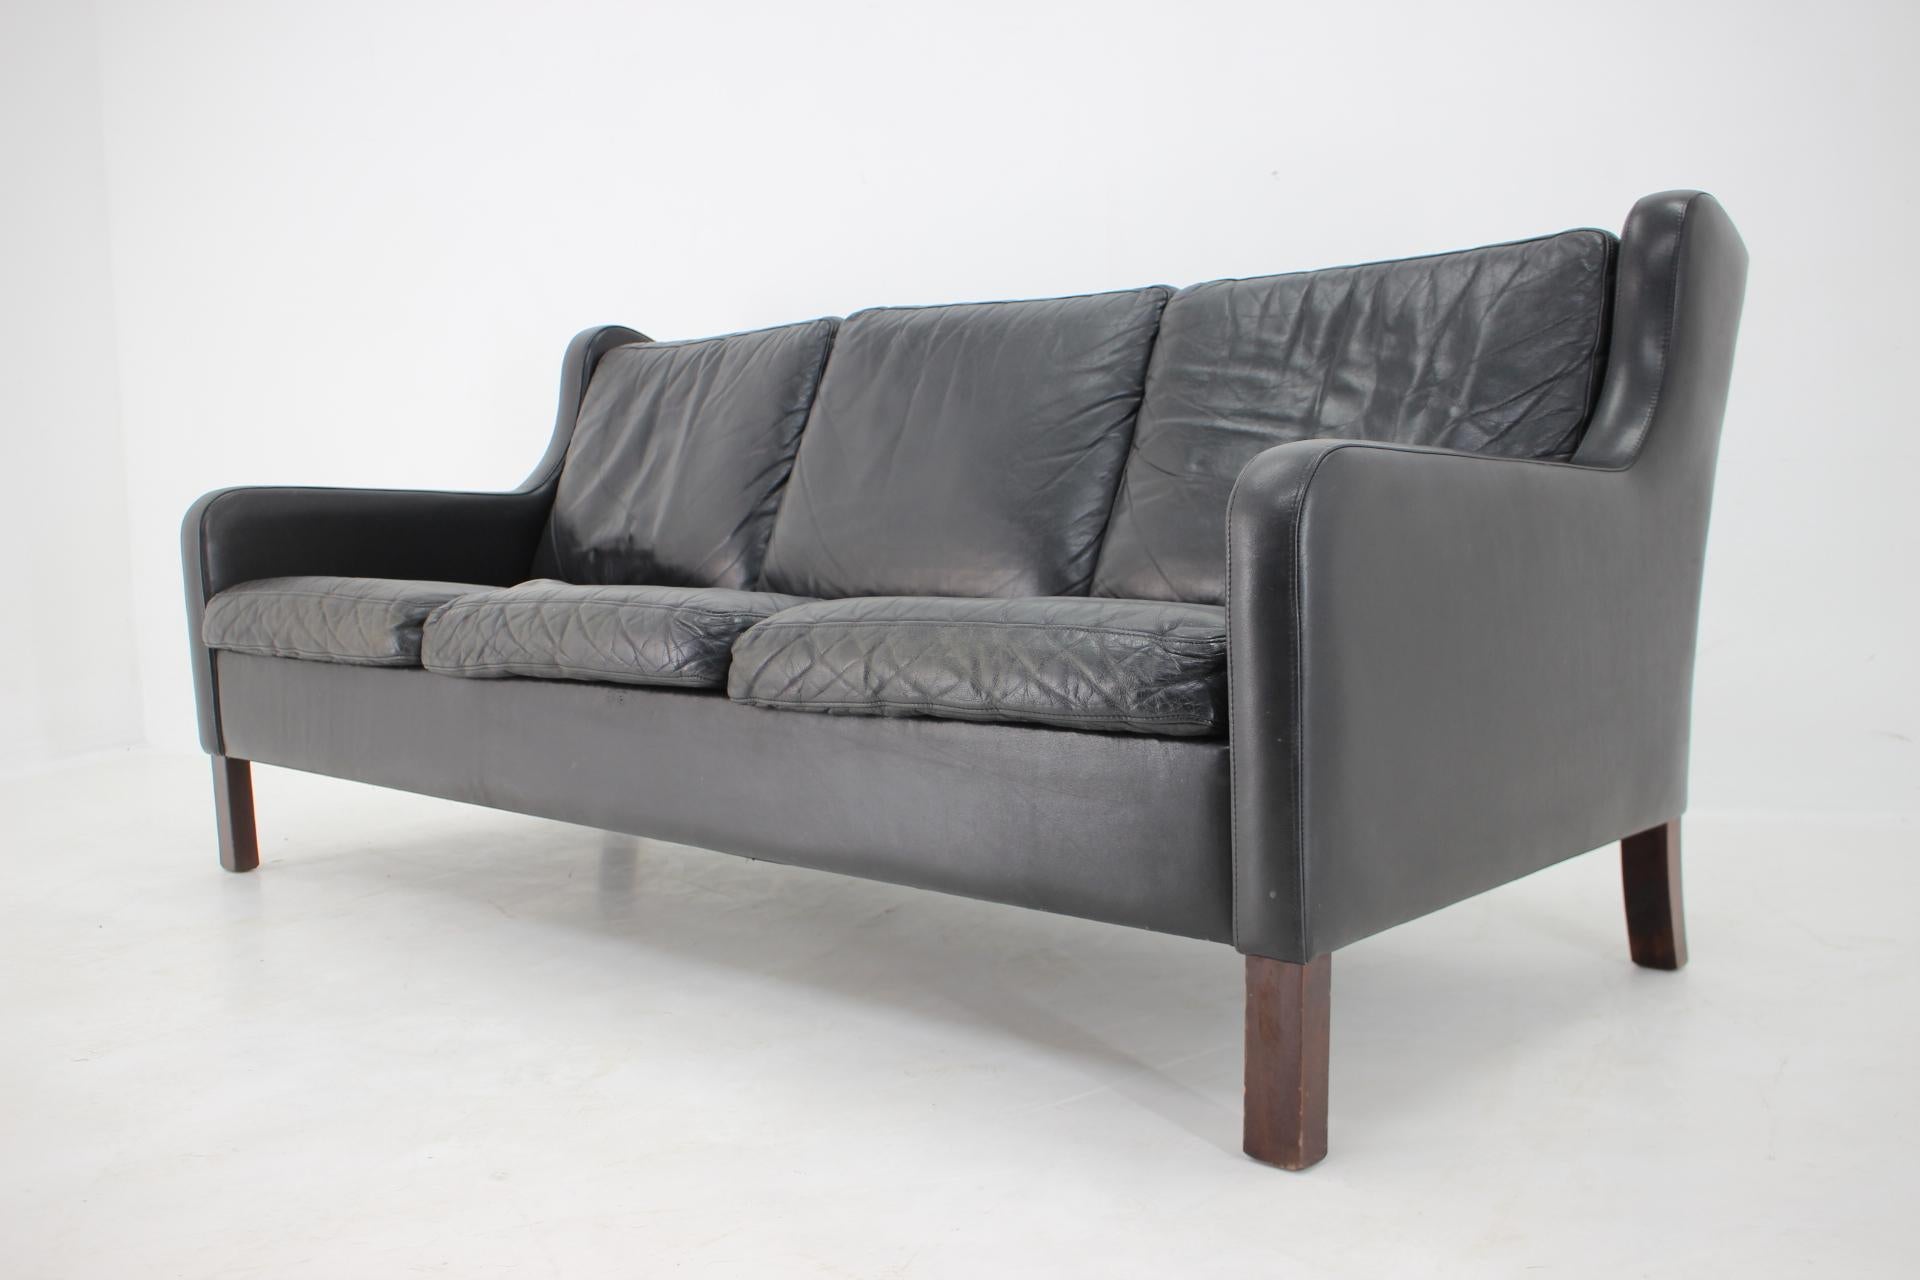 1970s Danish Black Leather 3-Seater Sofa In Good Condition For Sale In Praha, CZ